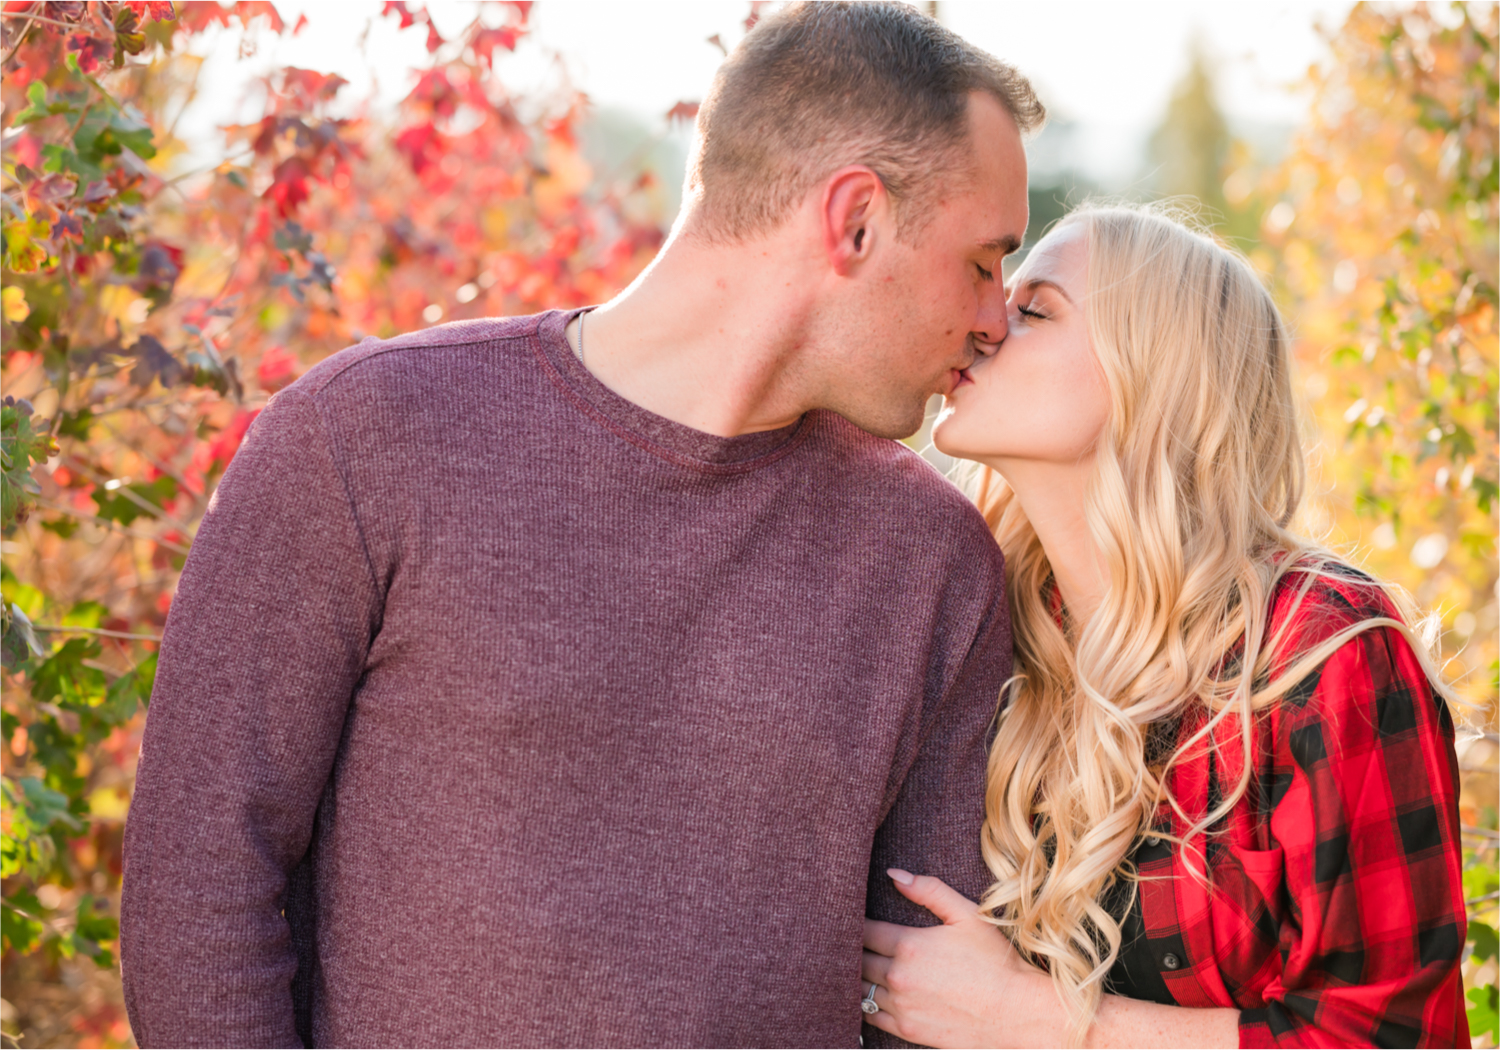 Romantic Fall Farmhouse Engagement at Jessup Farm | Britni Girard Photography | Colorado Wedding Photographer and Videography team | Rustic fences, fall leaves and barn doors in Fort Collins